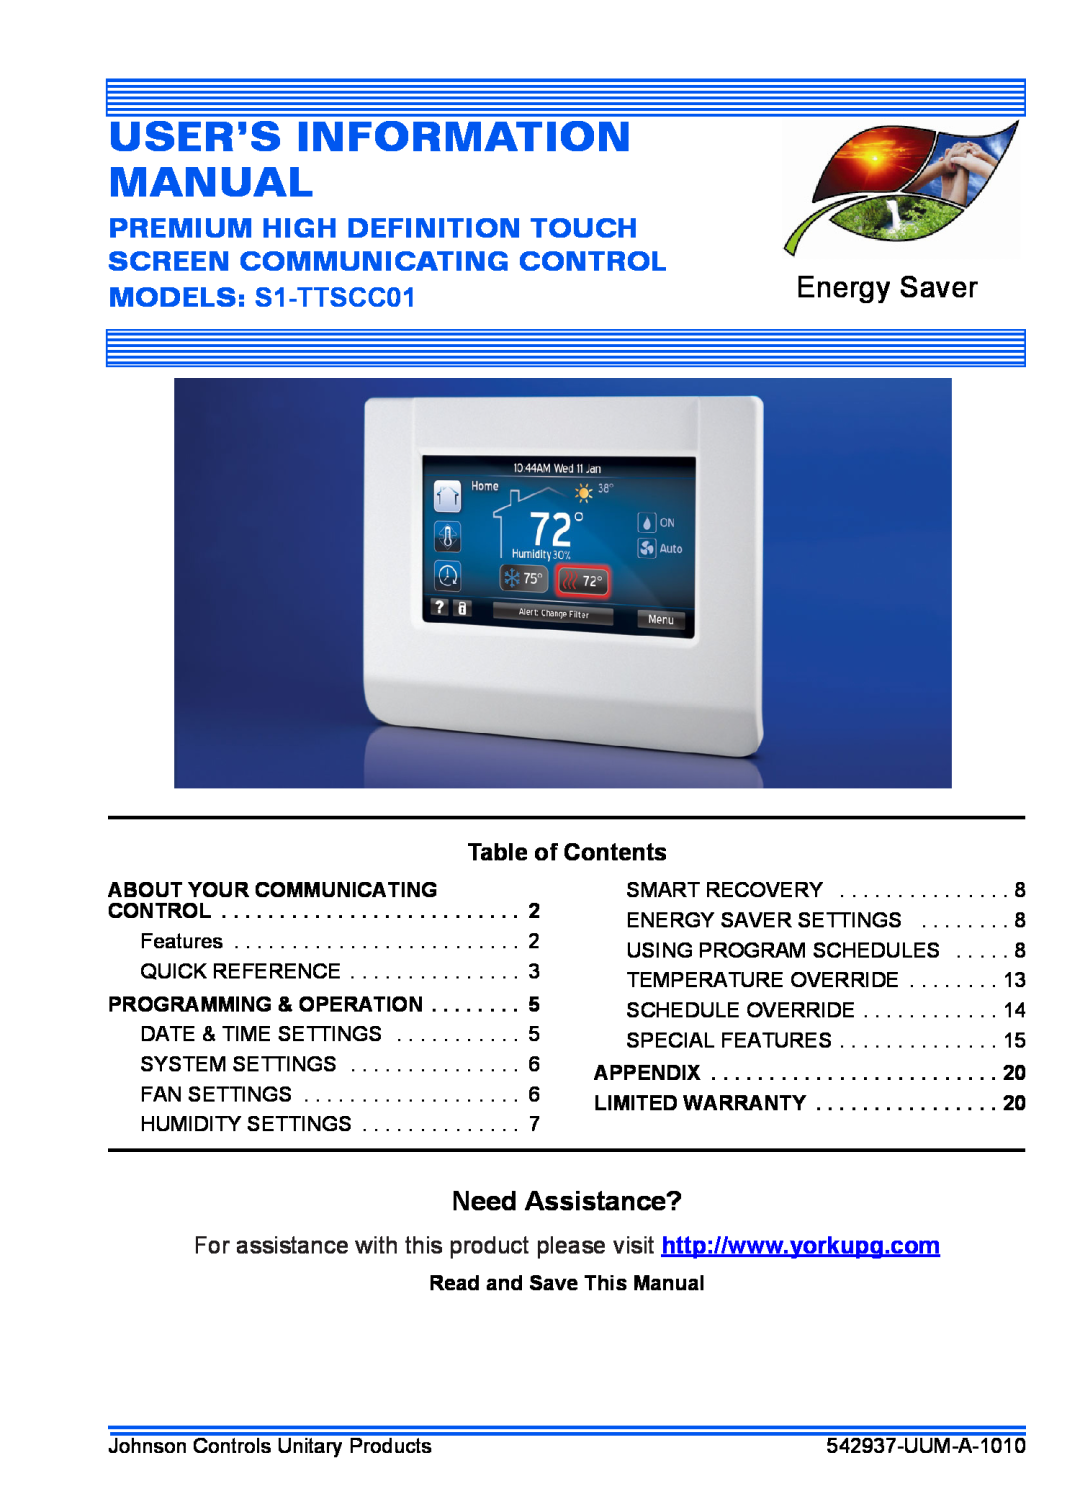 Johnson Controls S1-TTSCC01 user manual Power-Upsequence, Non-Adjustablesettings/Functionality, Available Settings 